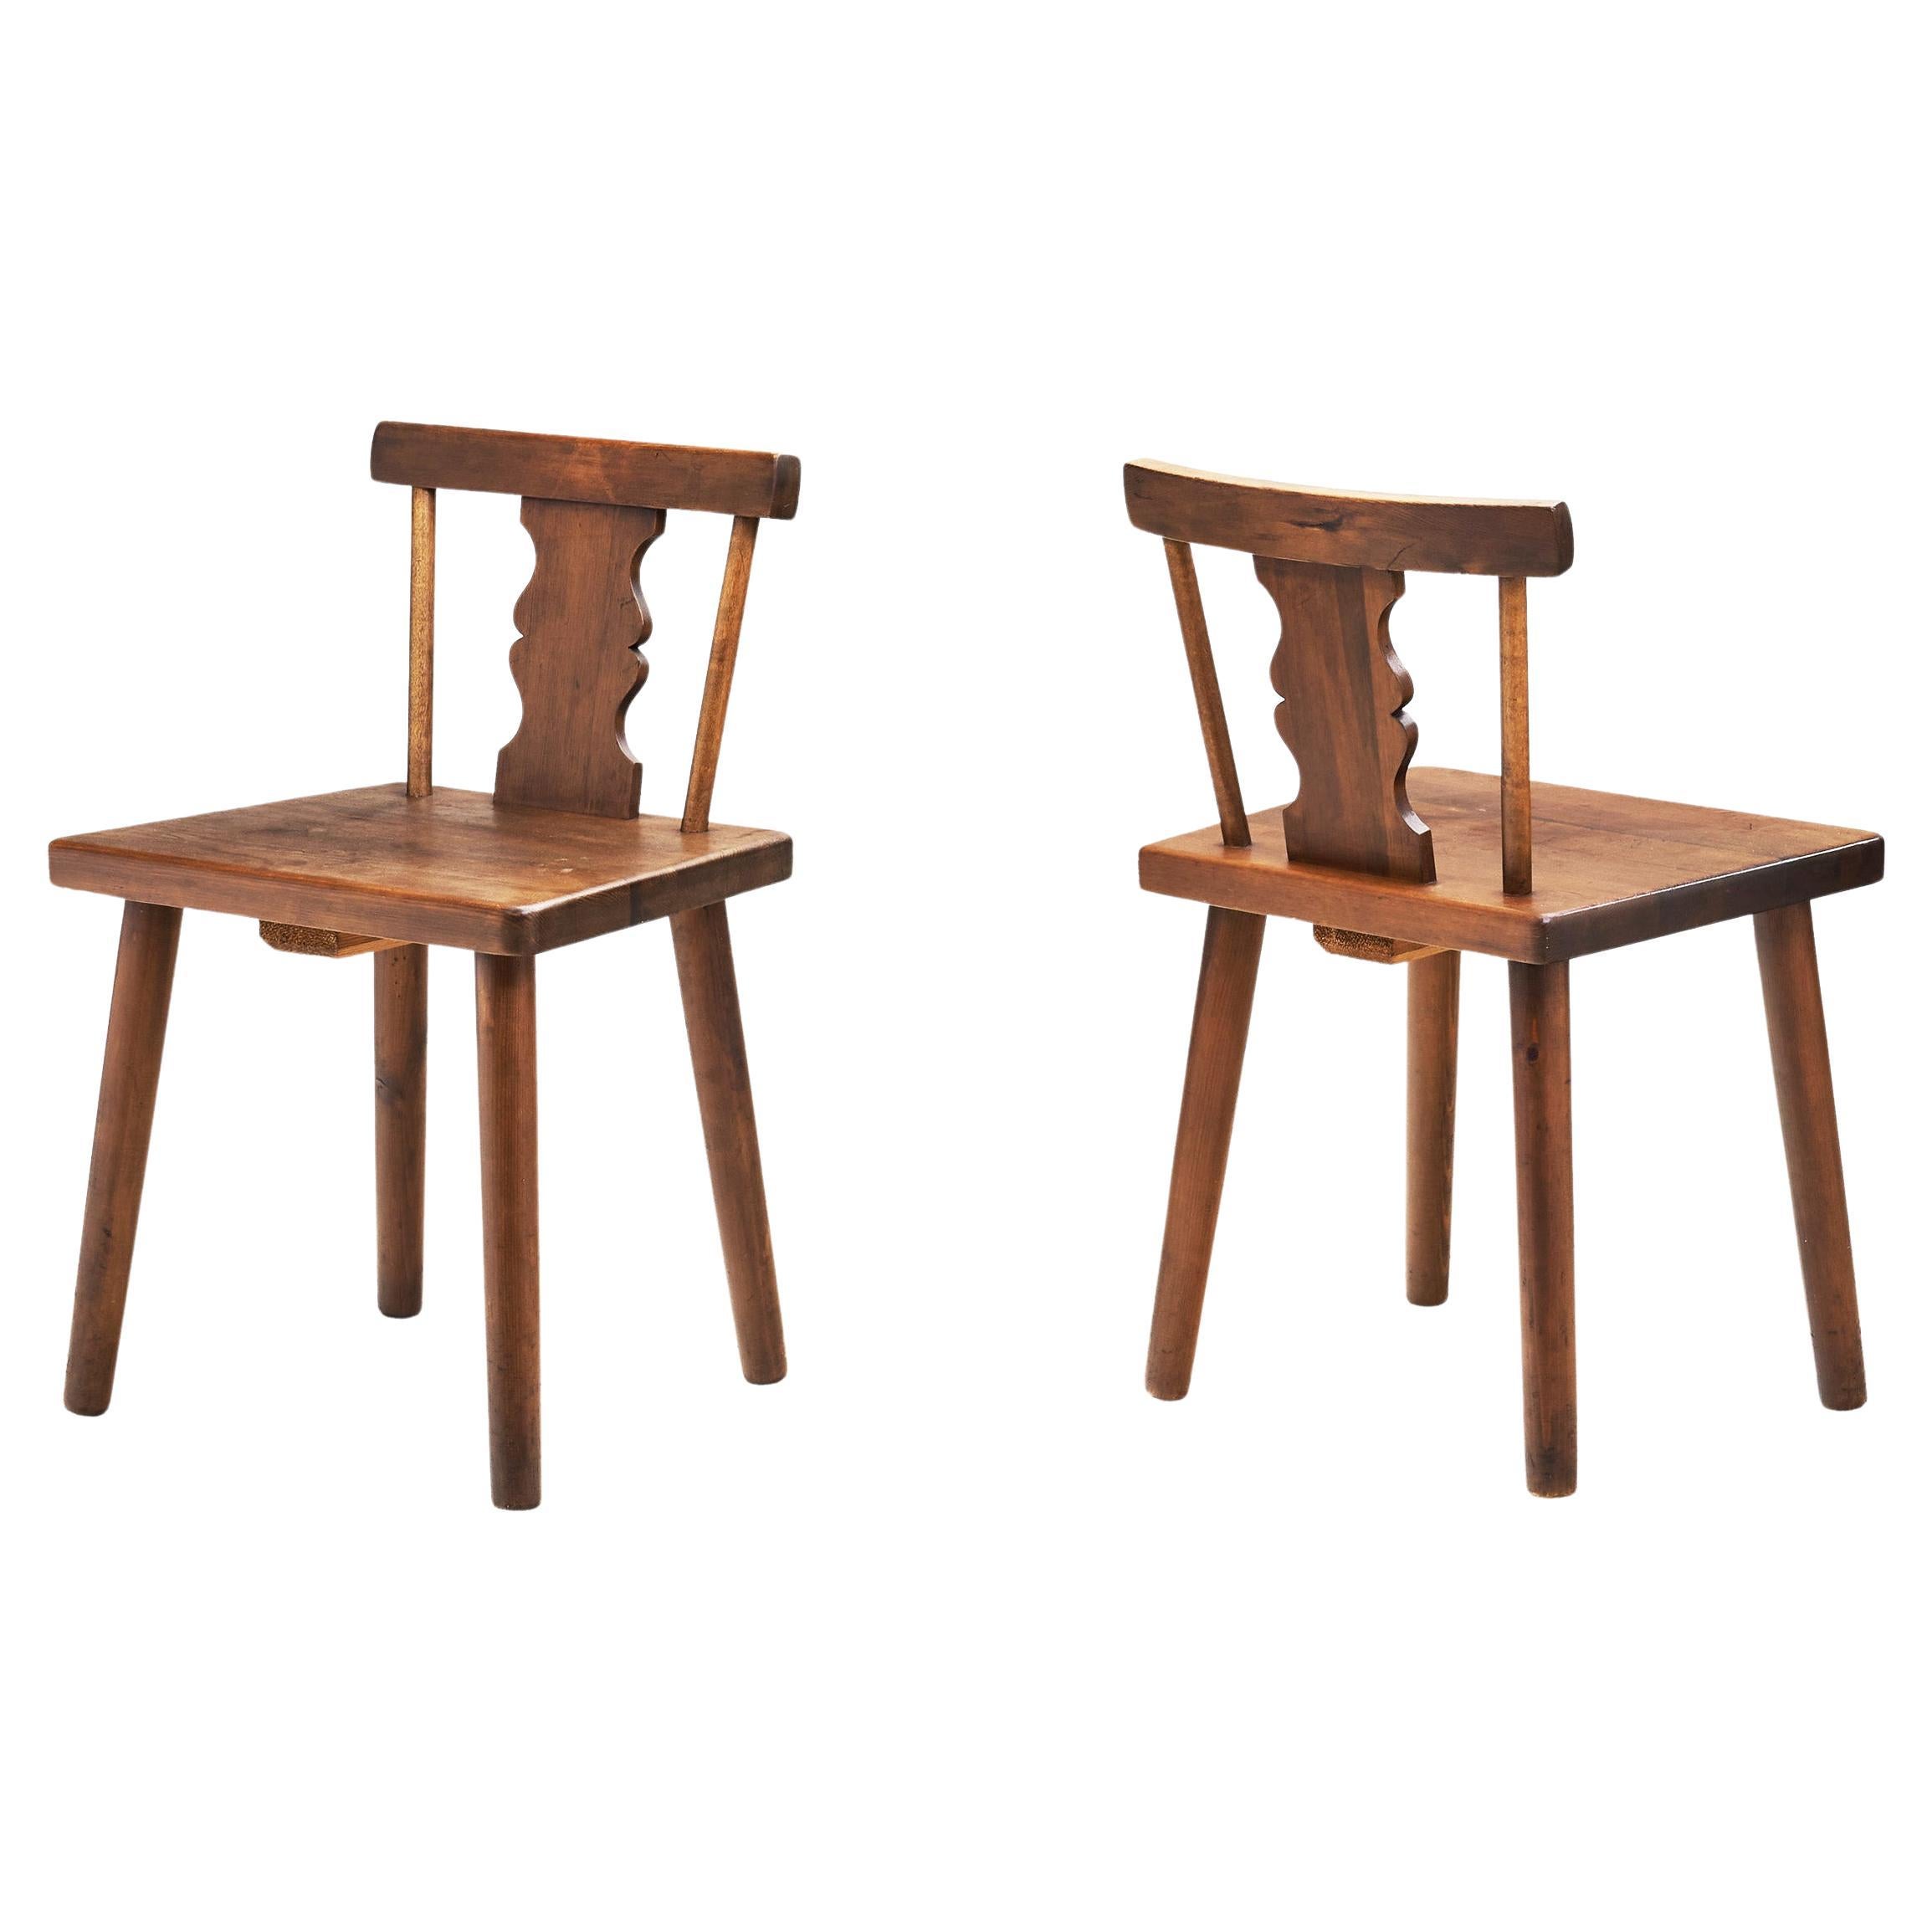 Rustic Solid Pine Chairs with Carved Backs, Europe early 20th century For Sale